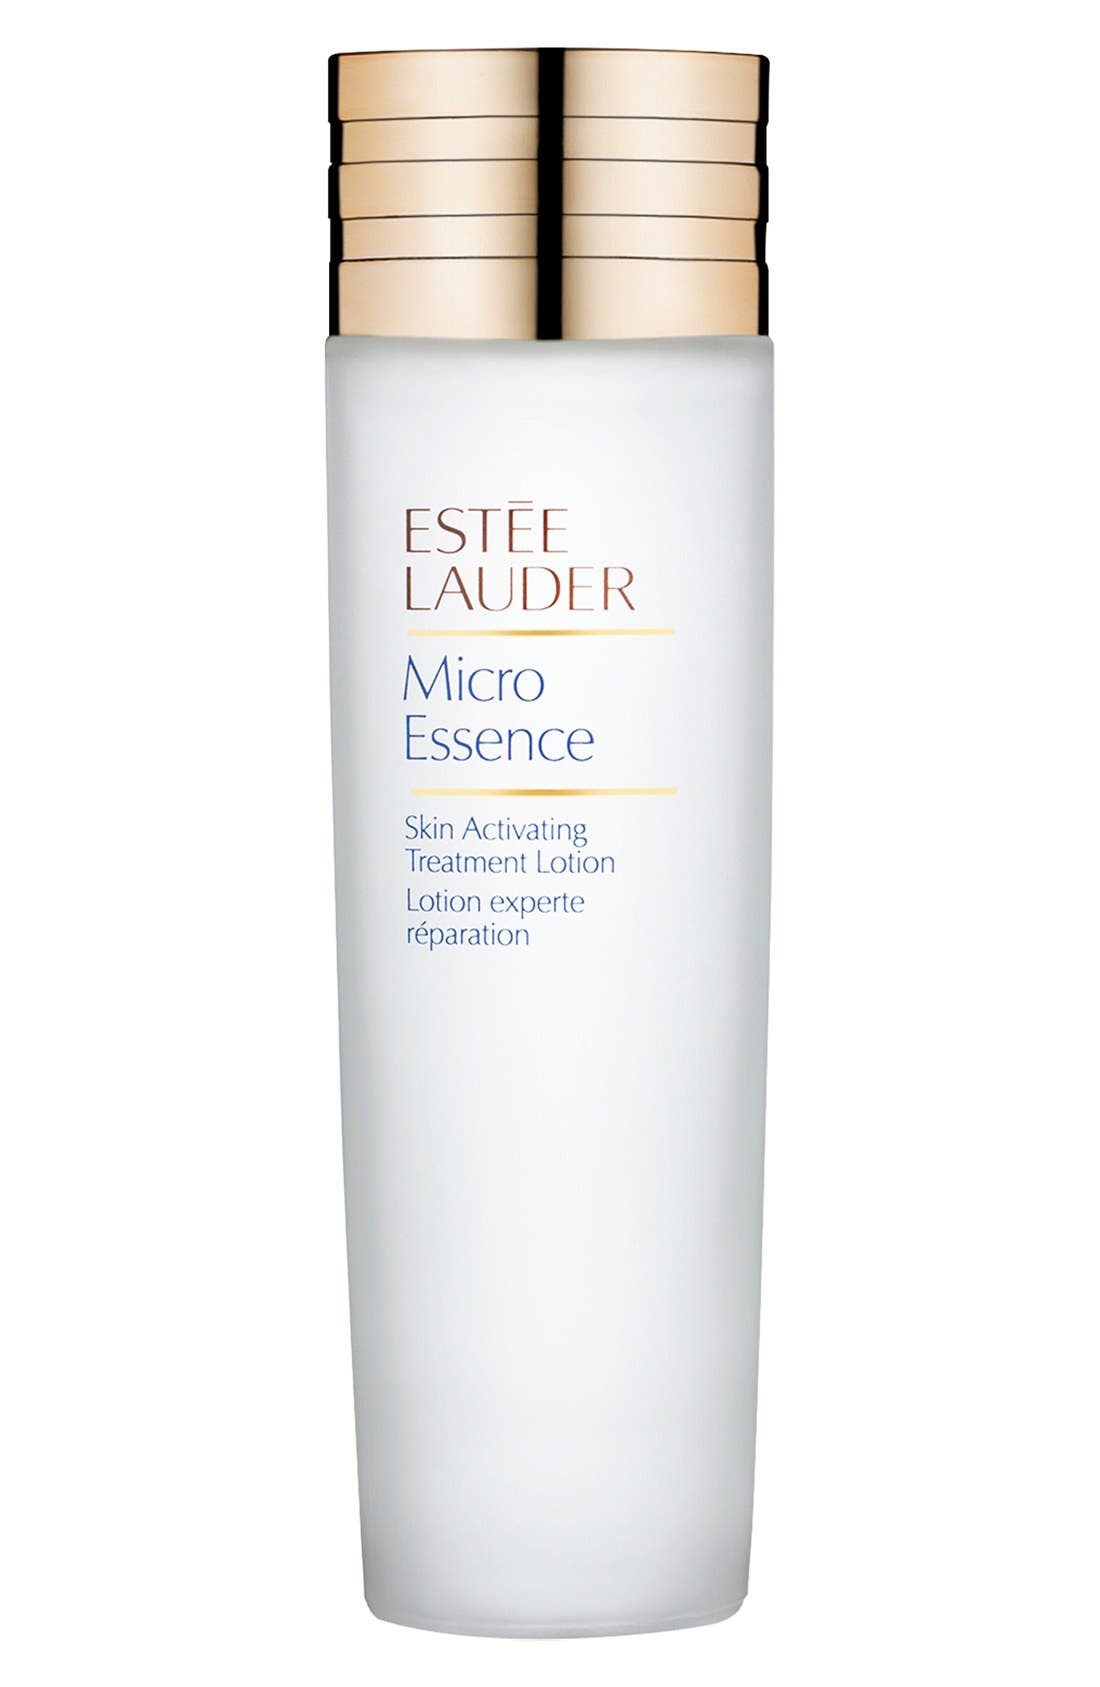 UPC 887167166851 product image for Estee Lauder Micro Essence Skin Activating Treatment Lotion at Nordstrom, Size 2 | upcitemdb.com